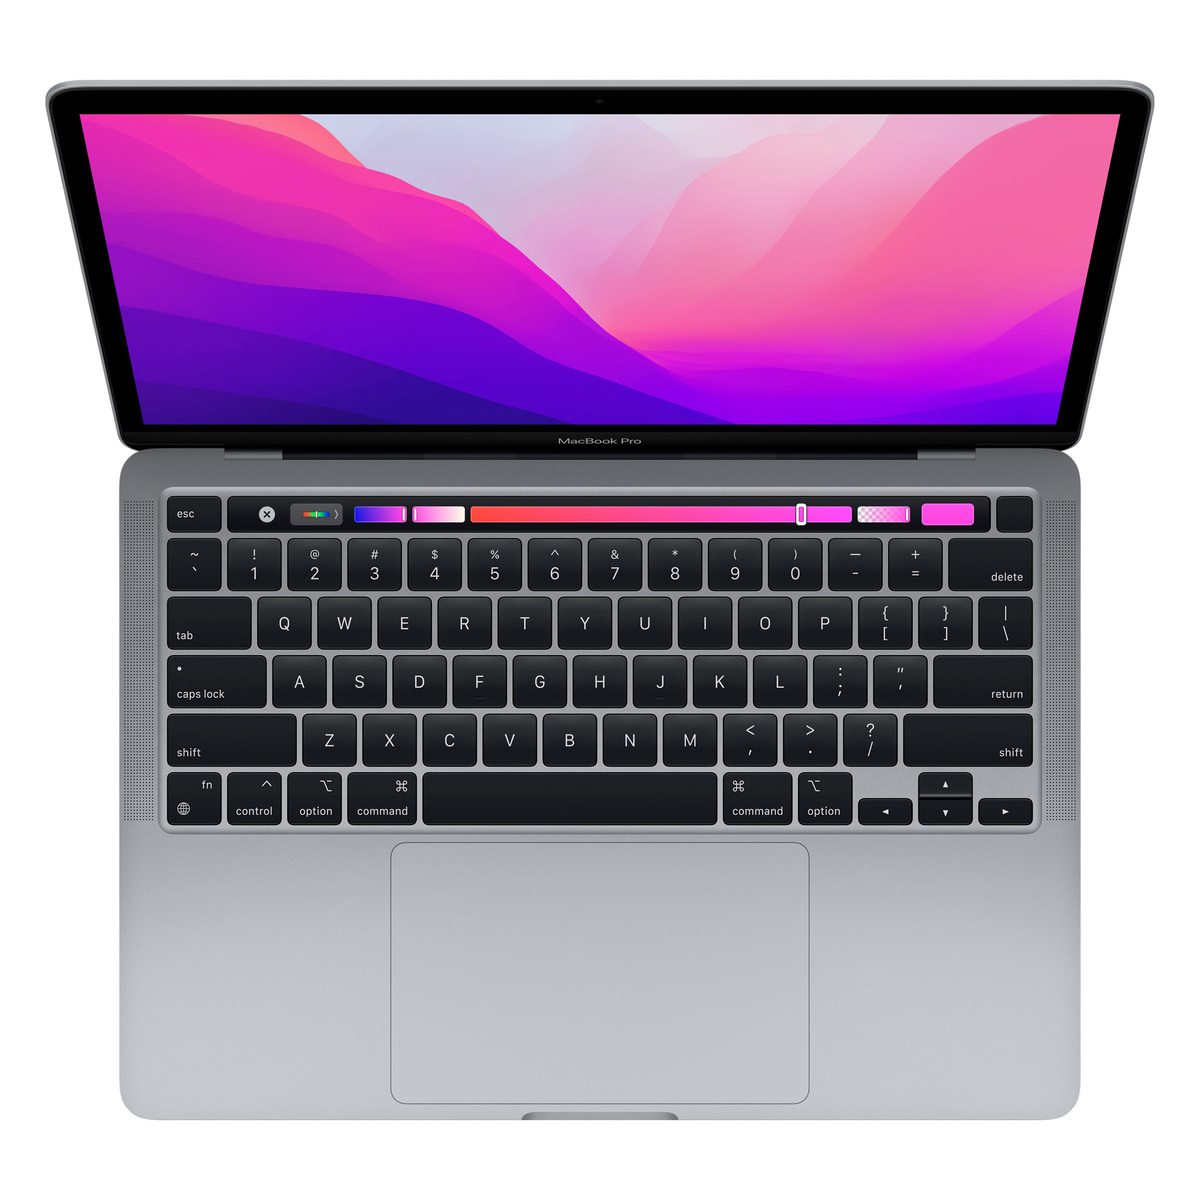 Apple 13-inch MacBook Pro: Apple M2 chip with 8-core CPU and 10-core GPU,512GB SSD,8GB RAM,Space Grey,English-Keyboard (MNEJ3ZS/A)